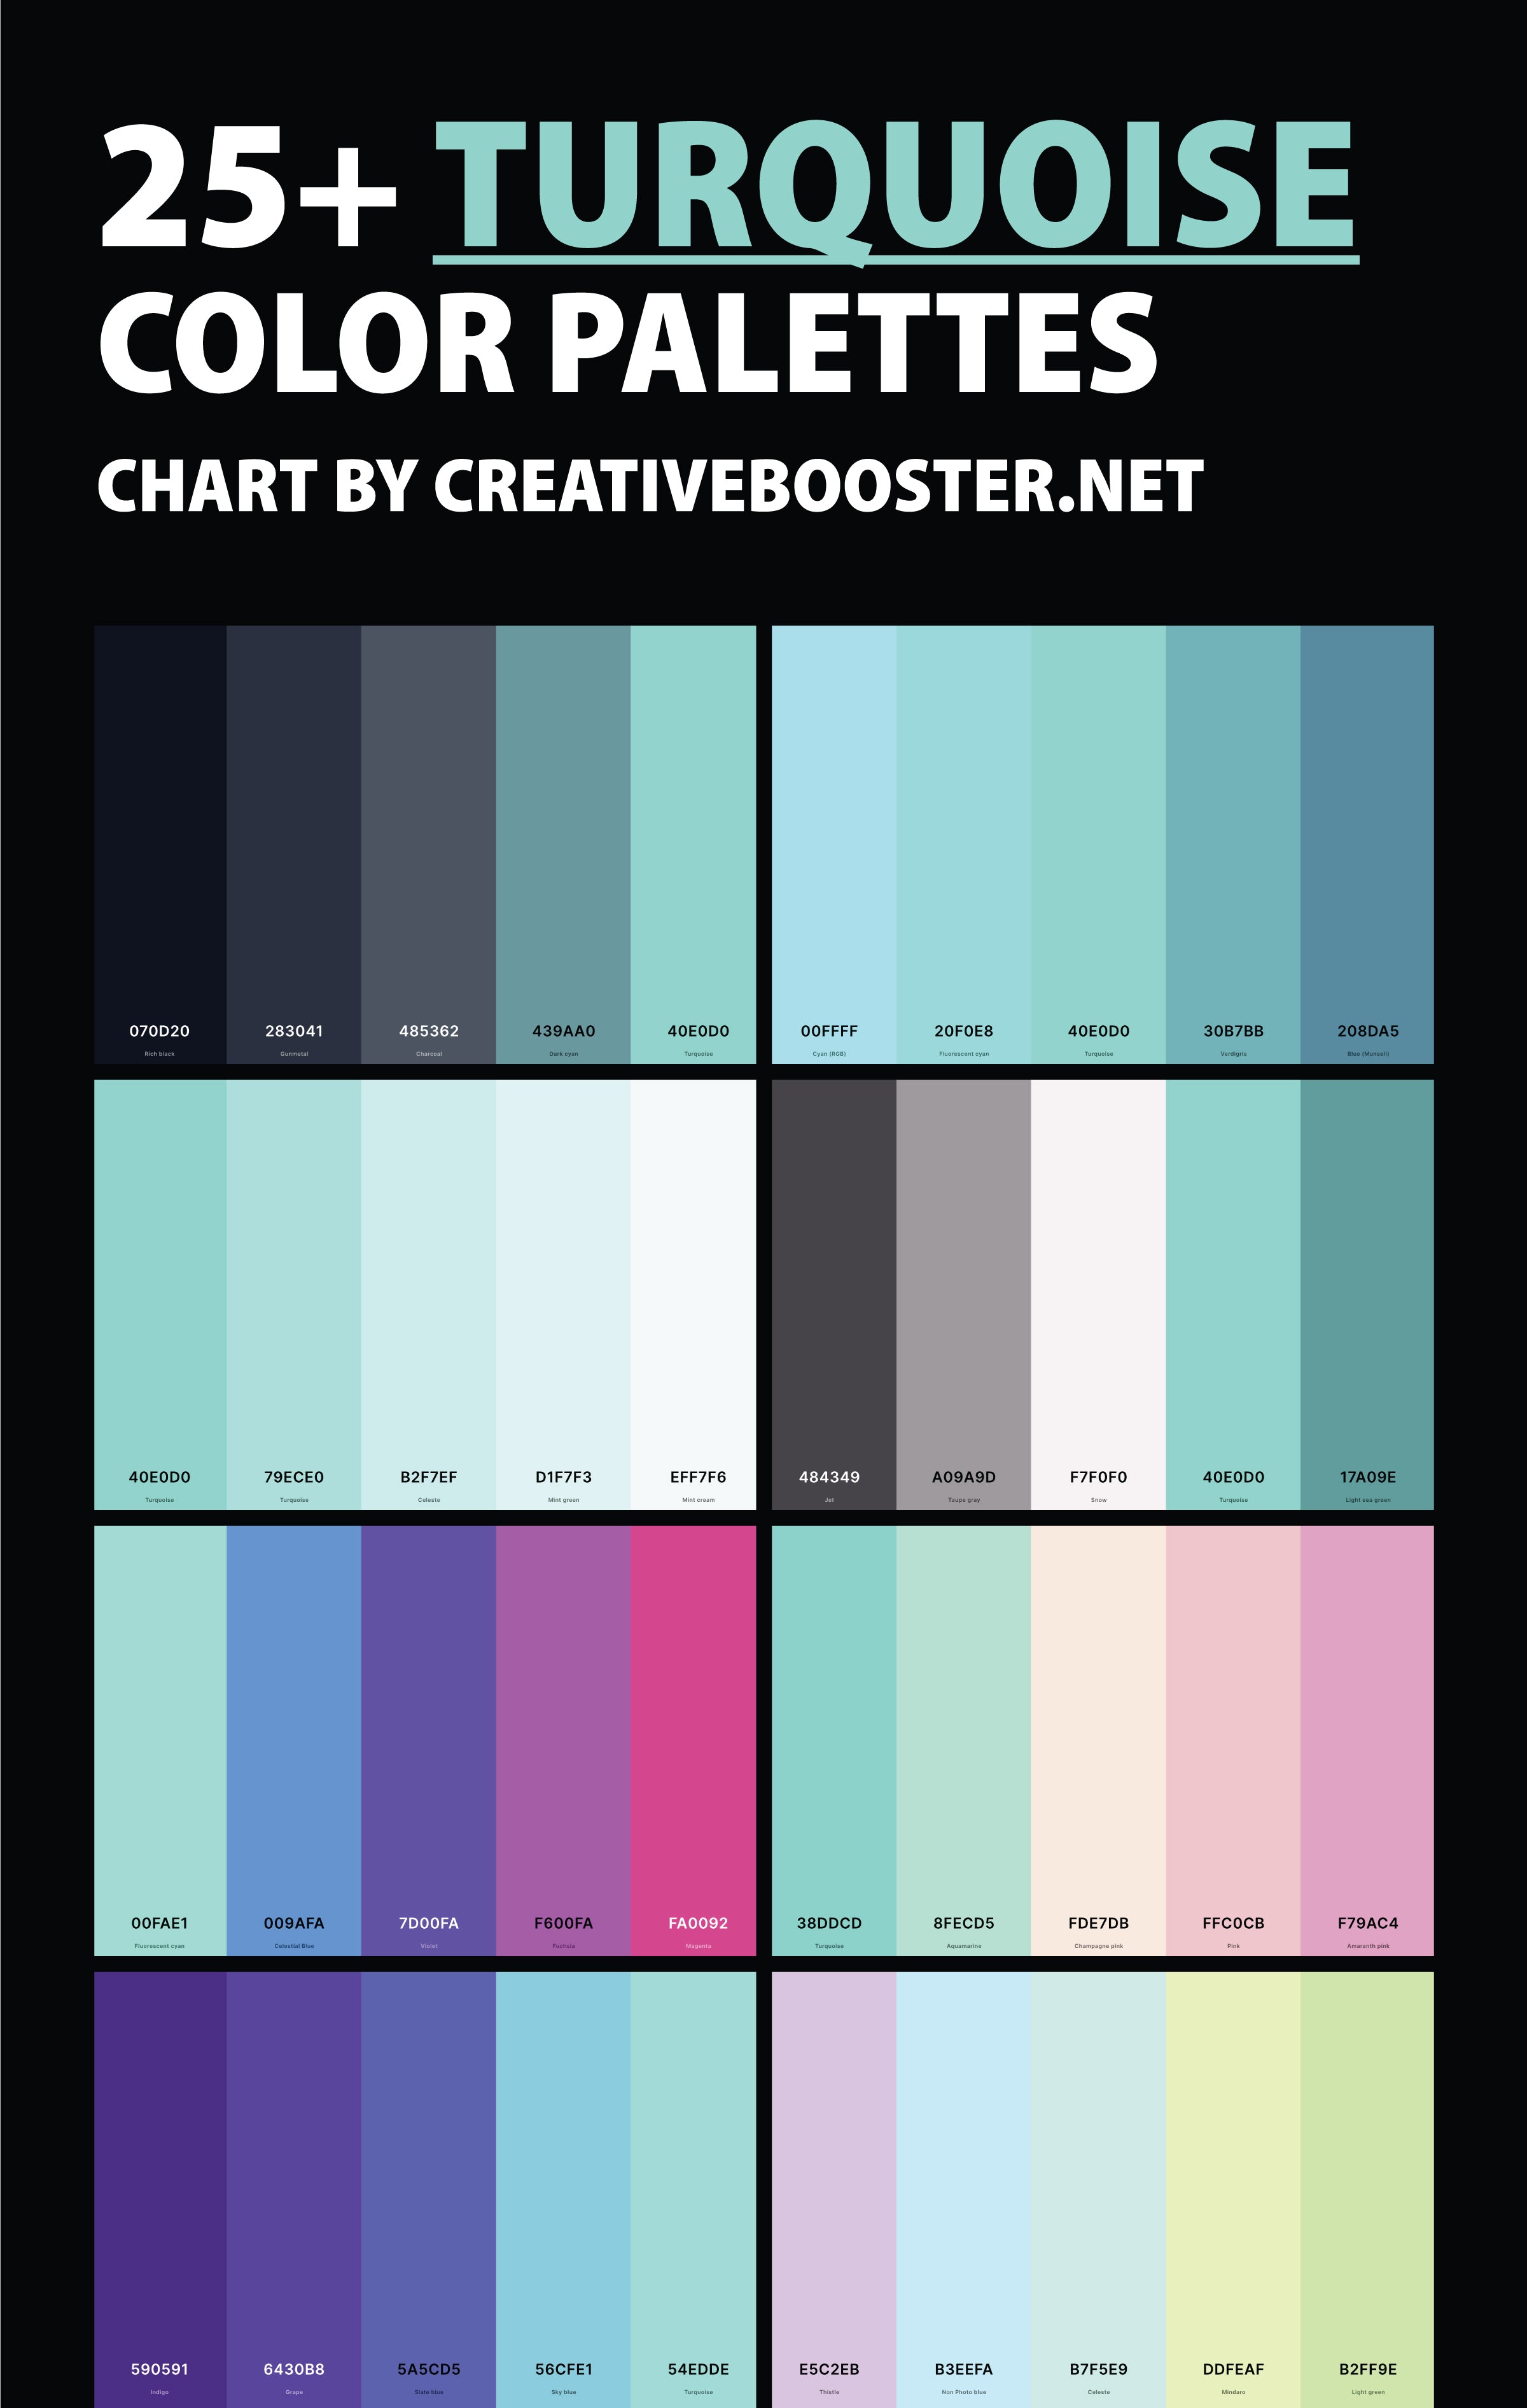 turquoise-color-palettes-chart-with-names-and-hex-codes-pinterest